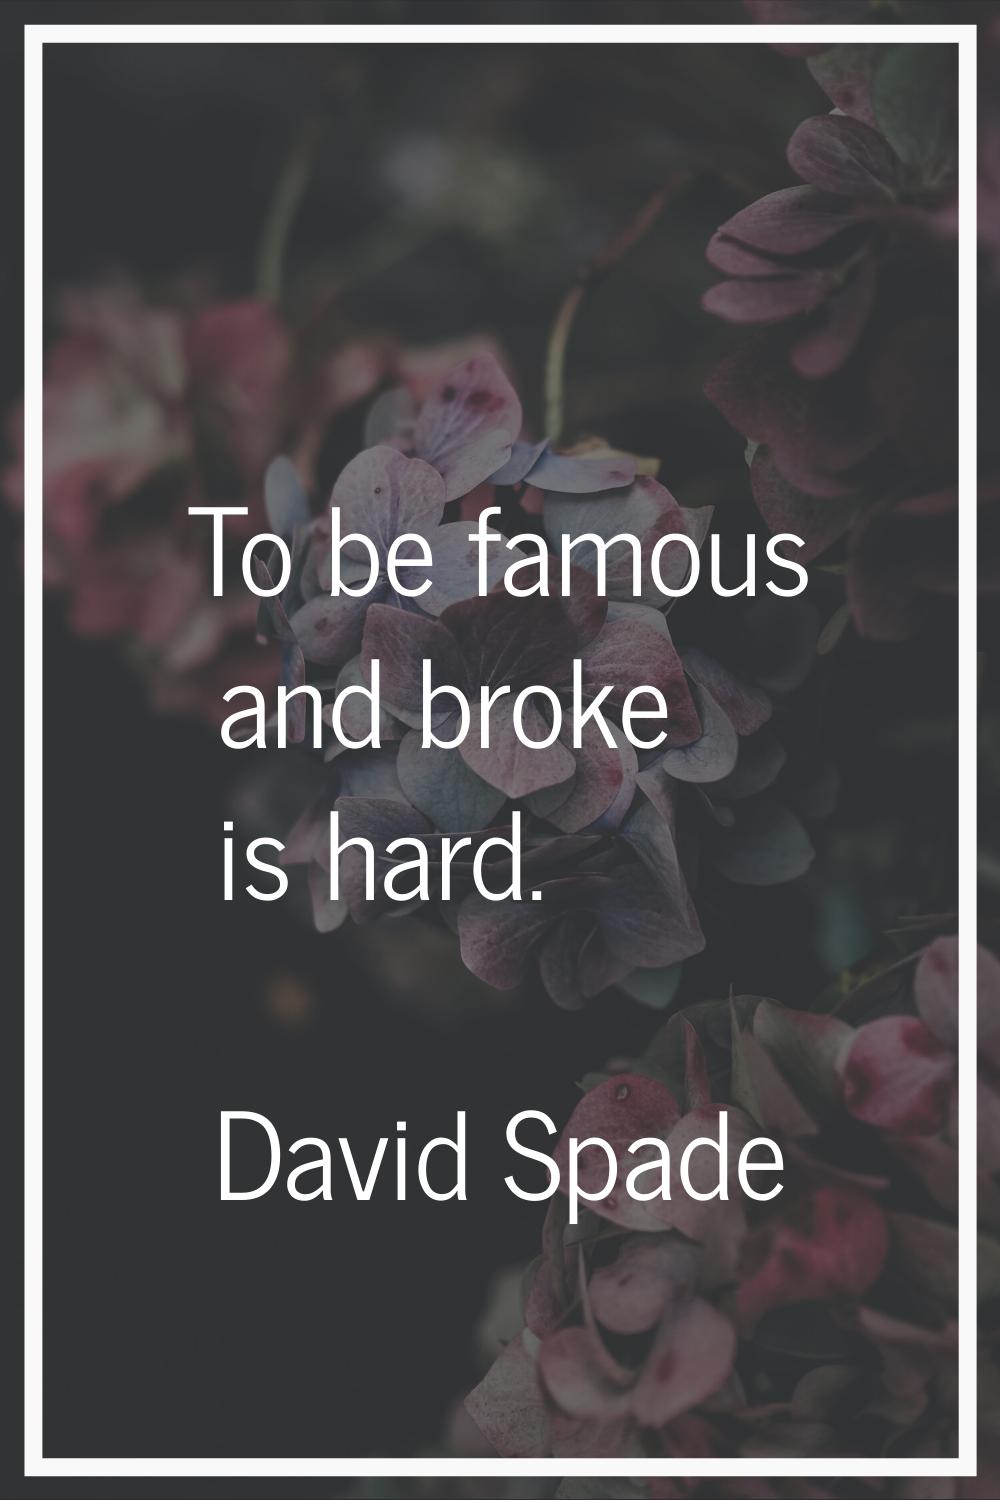 To be famous and broke is hard.